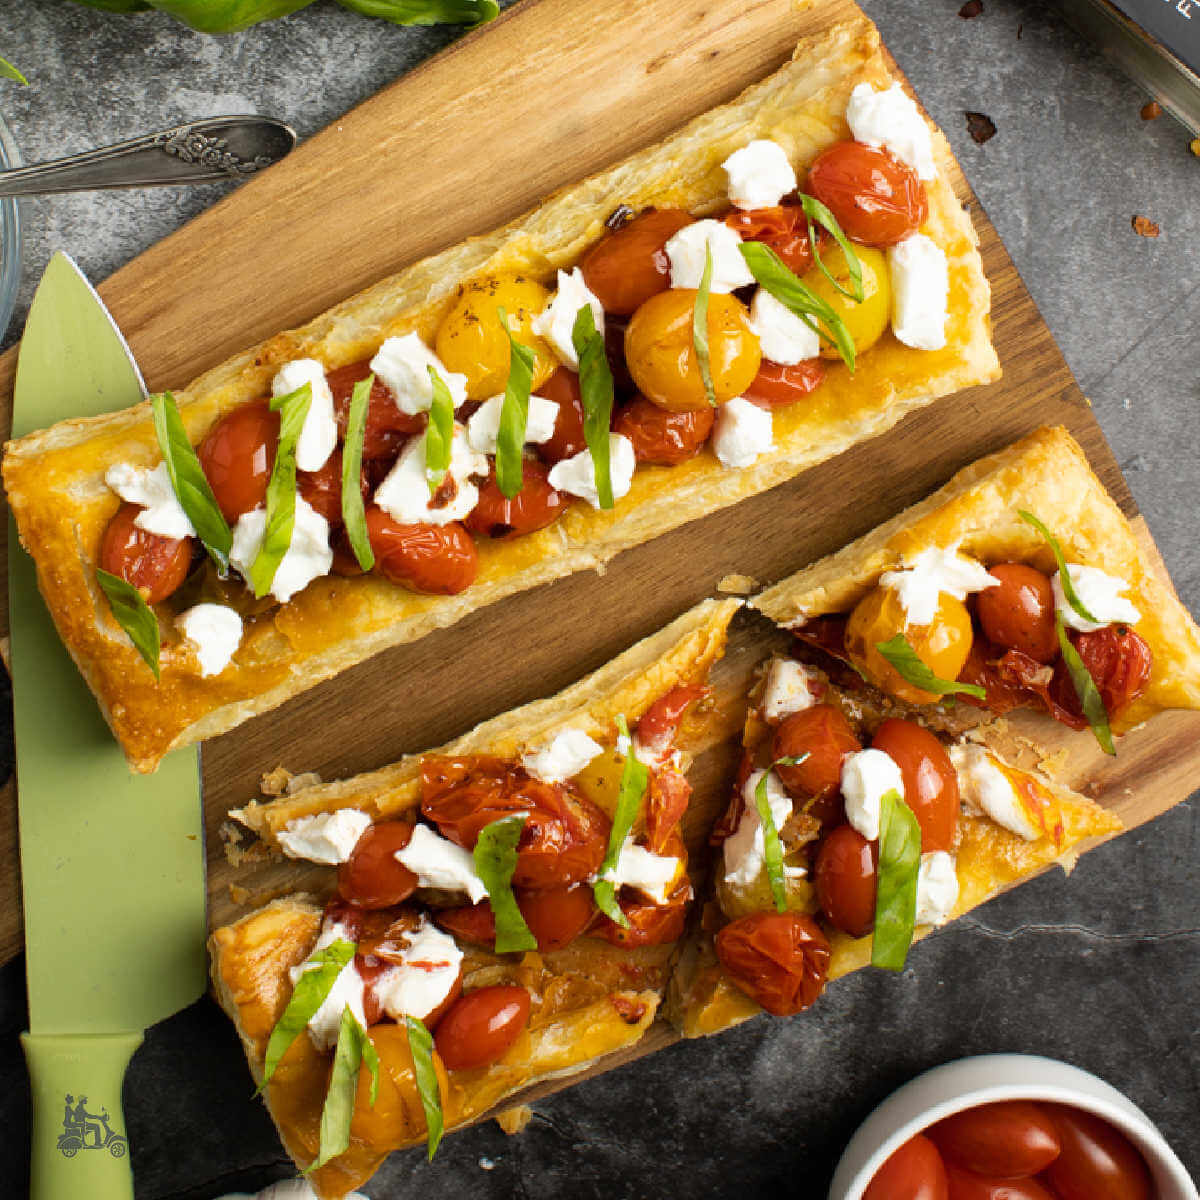 Two bruschetta pizzas made with puff pastry dough and topped with roasted tomatoes and goat cheese with julienned basil.